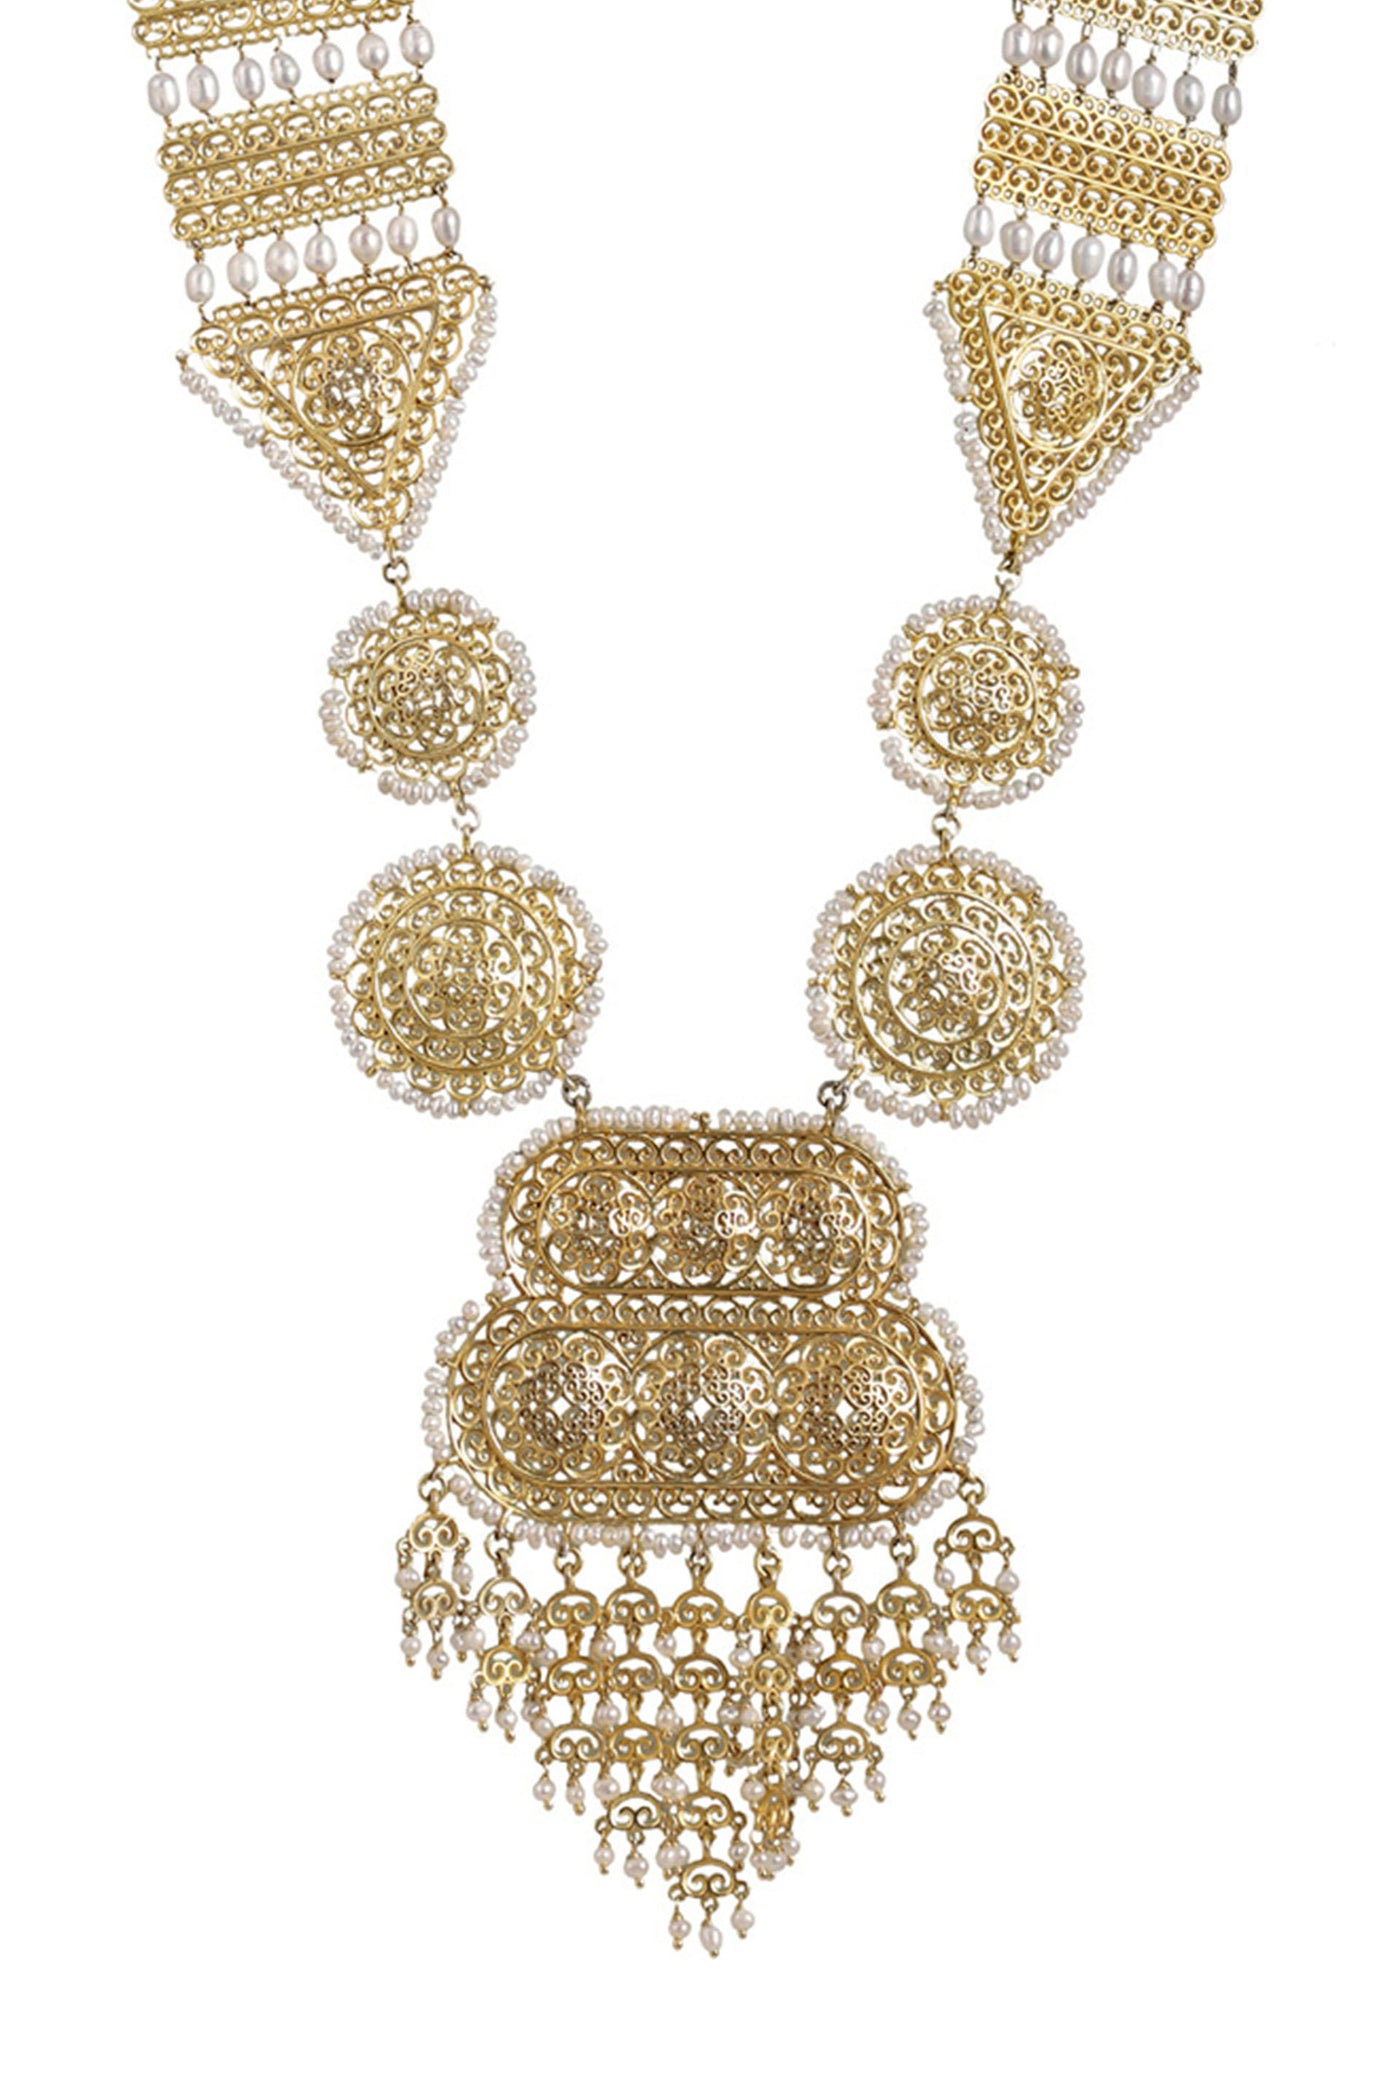 Zariin 22kt Gold Plated Handcrafted White Fresh Water Pearls With Filigree Work Traditional Raani Haar Necklace festive indian designer fashion jewellery online shopping melange singapore